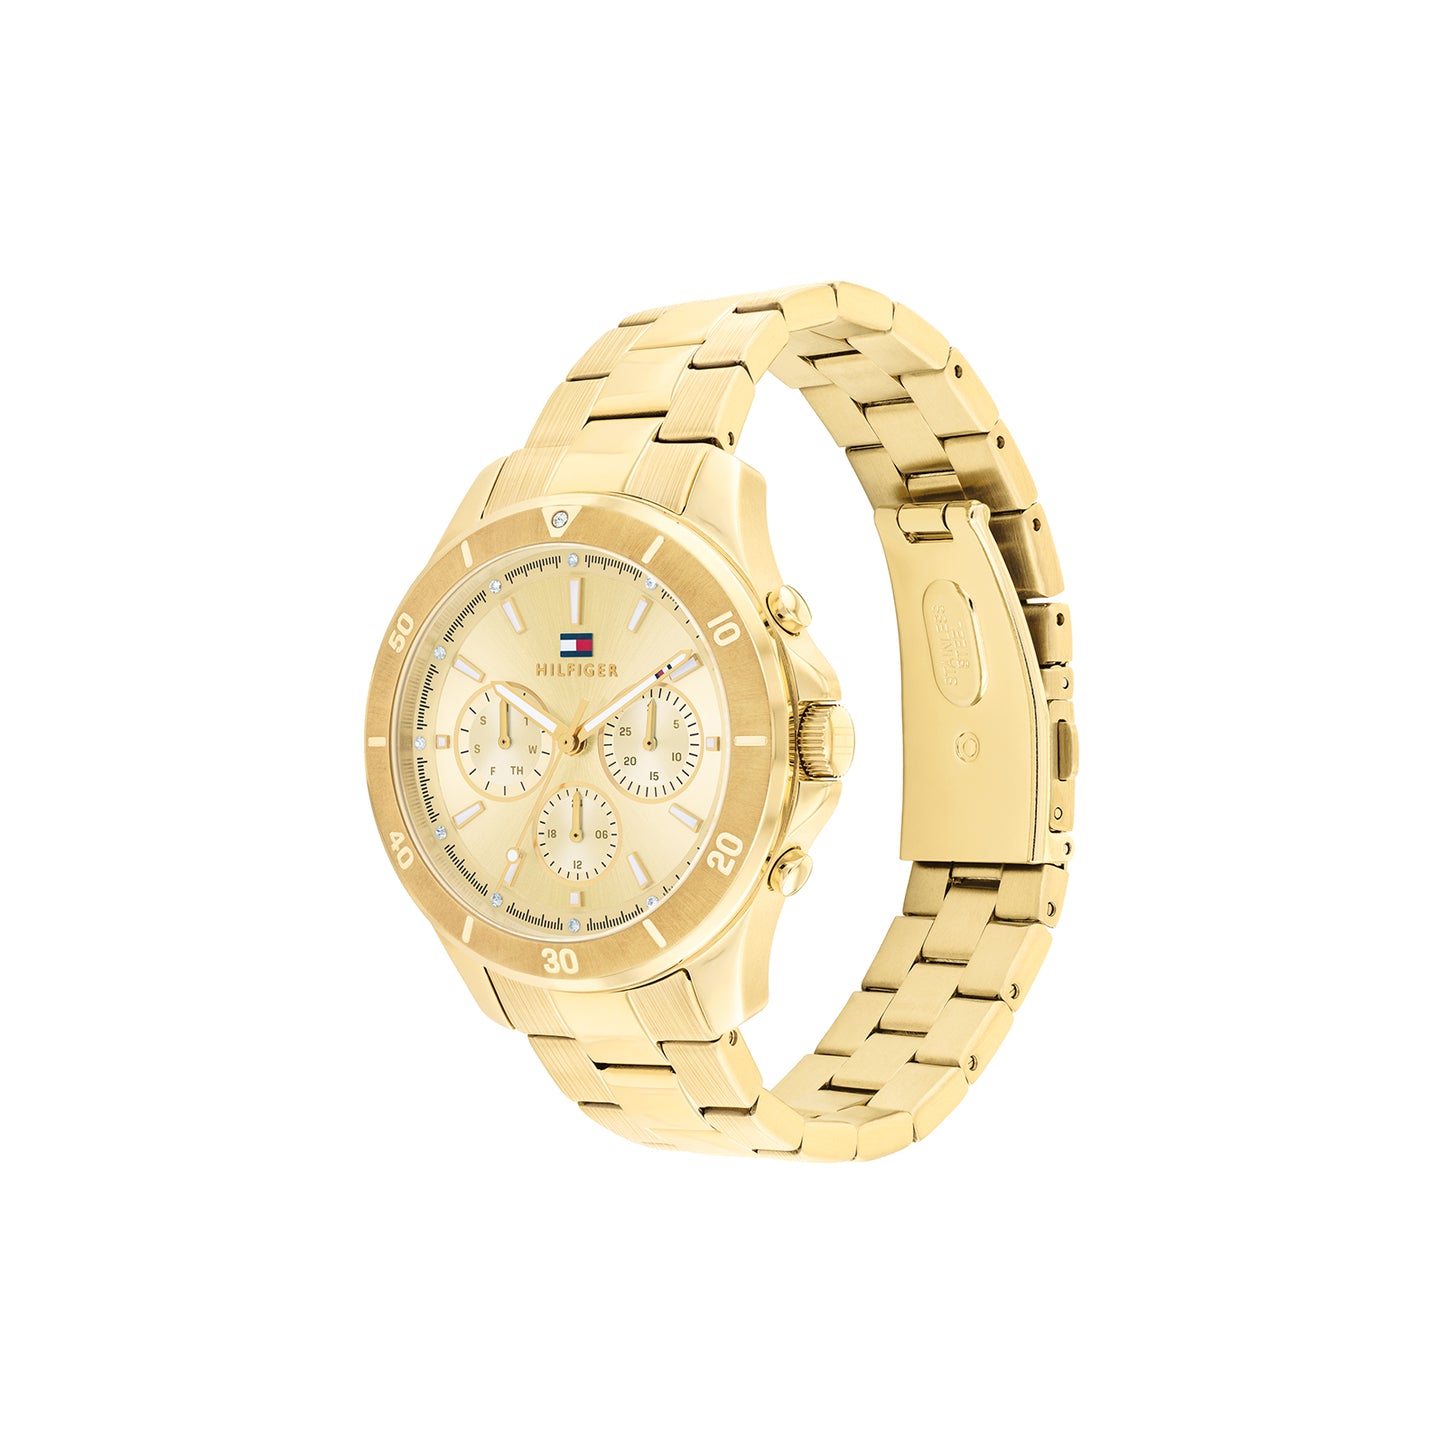 Tommy Hilfiger 1782640 Women's Ionic Thin Gold Plated Steel Watch